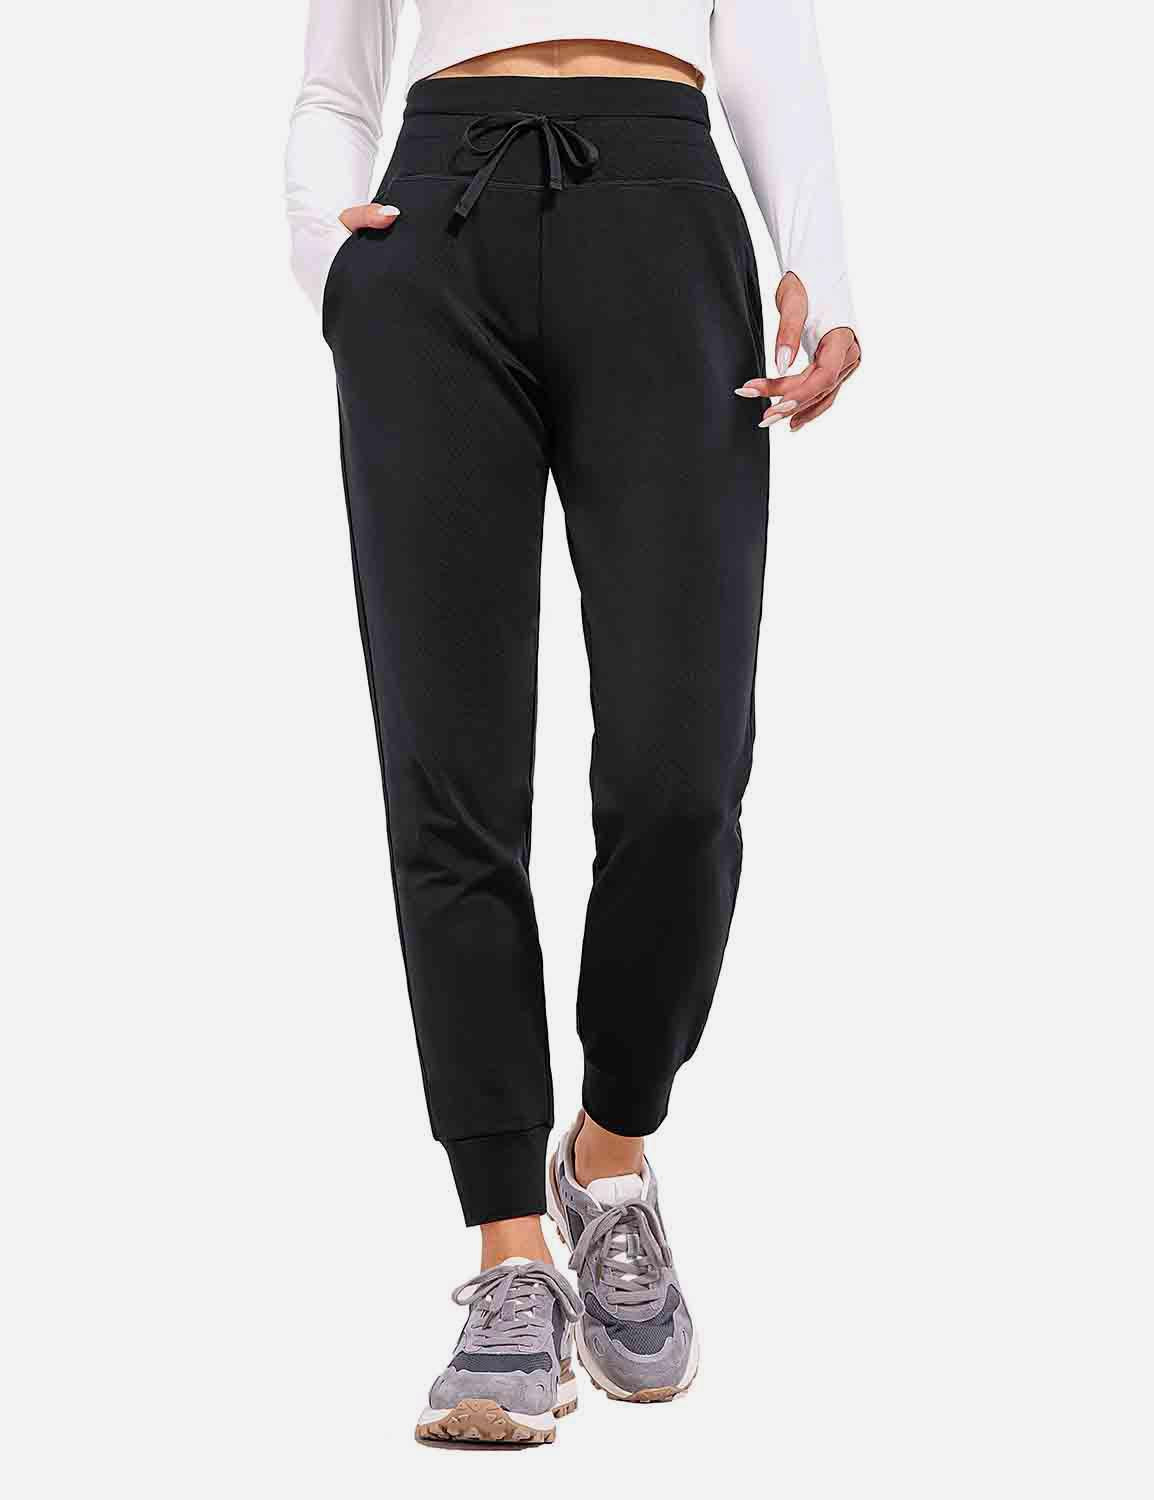 Baleaf Women's High Rise Water Resistant Tapered Joggers